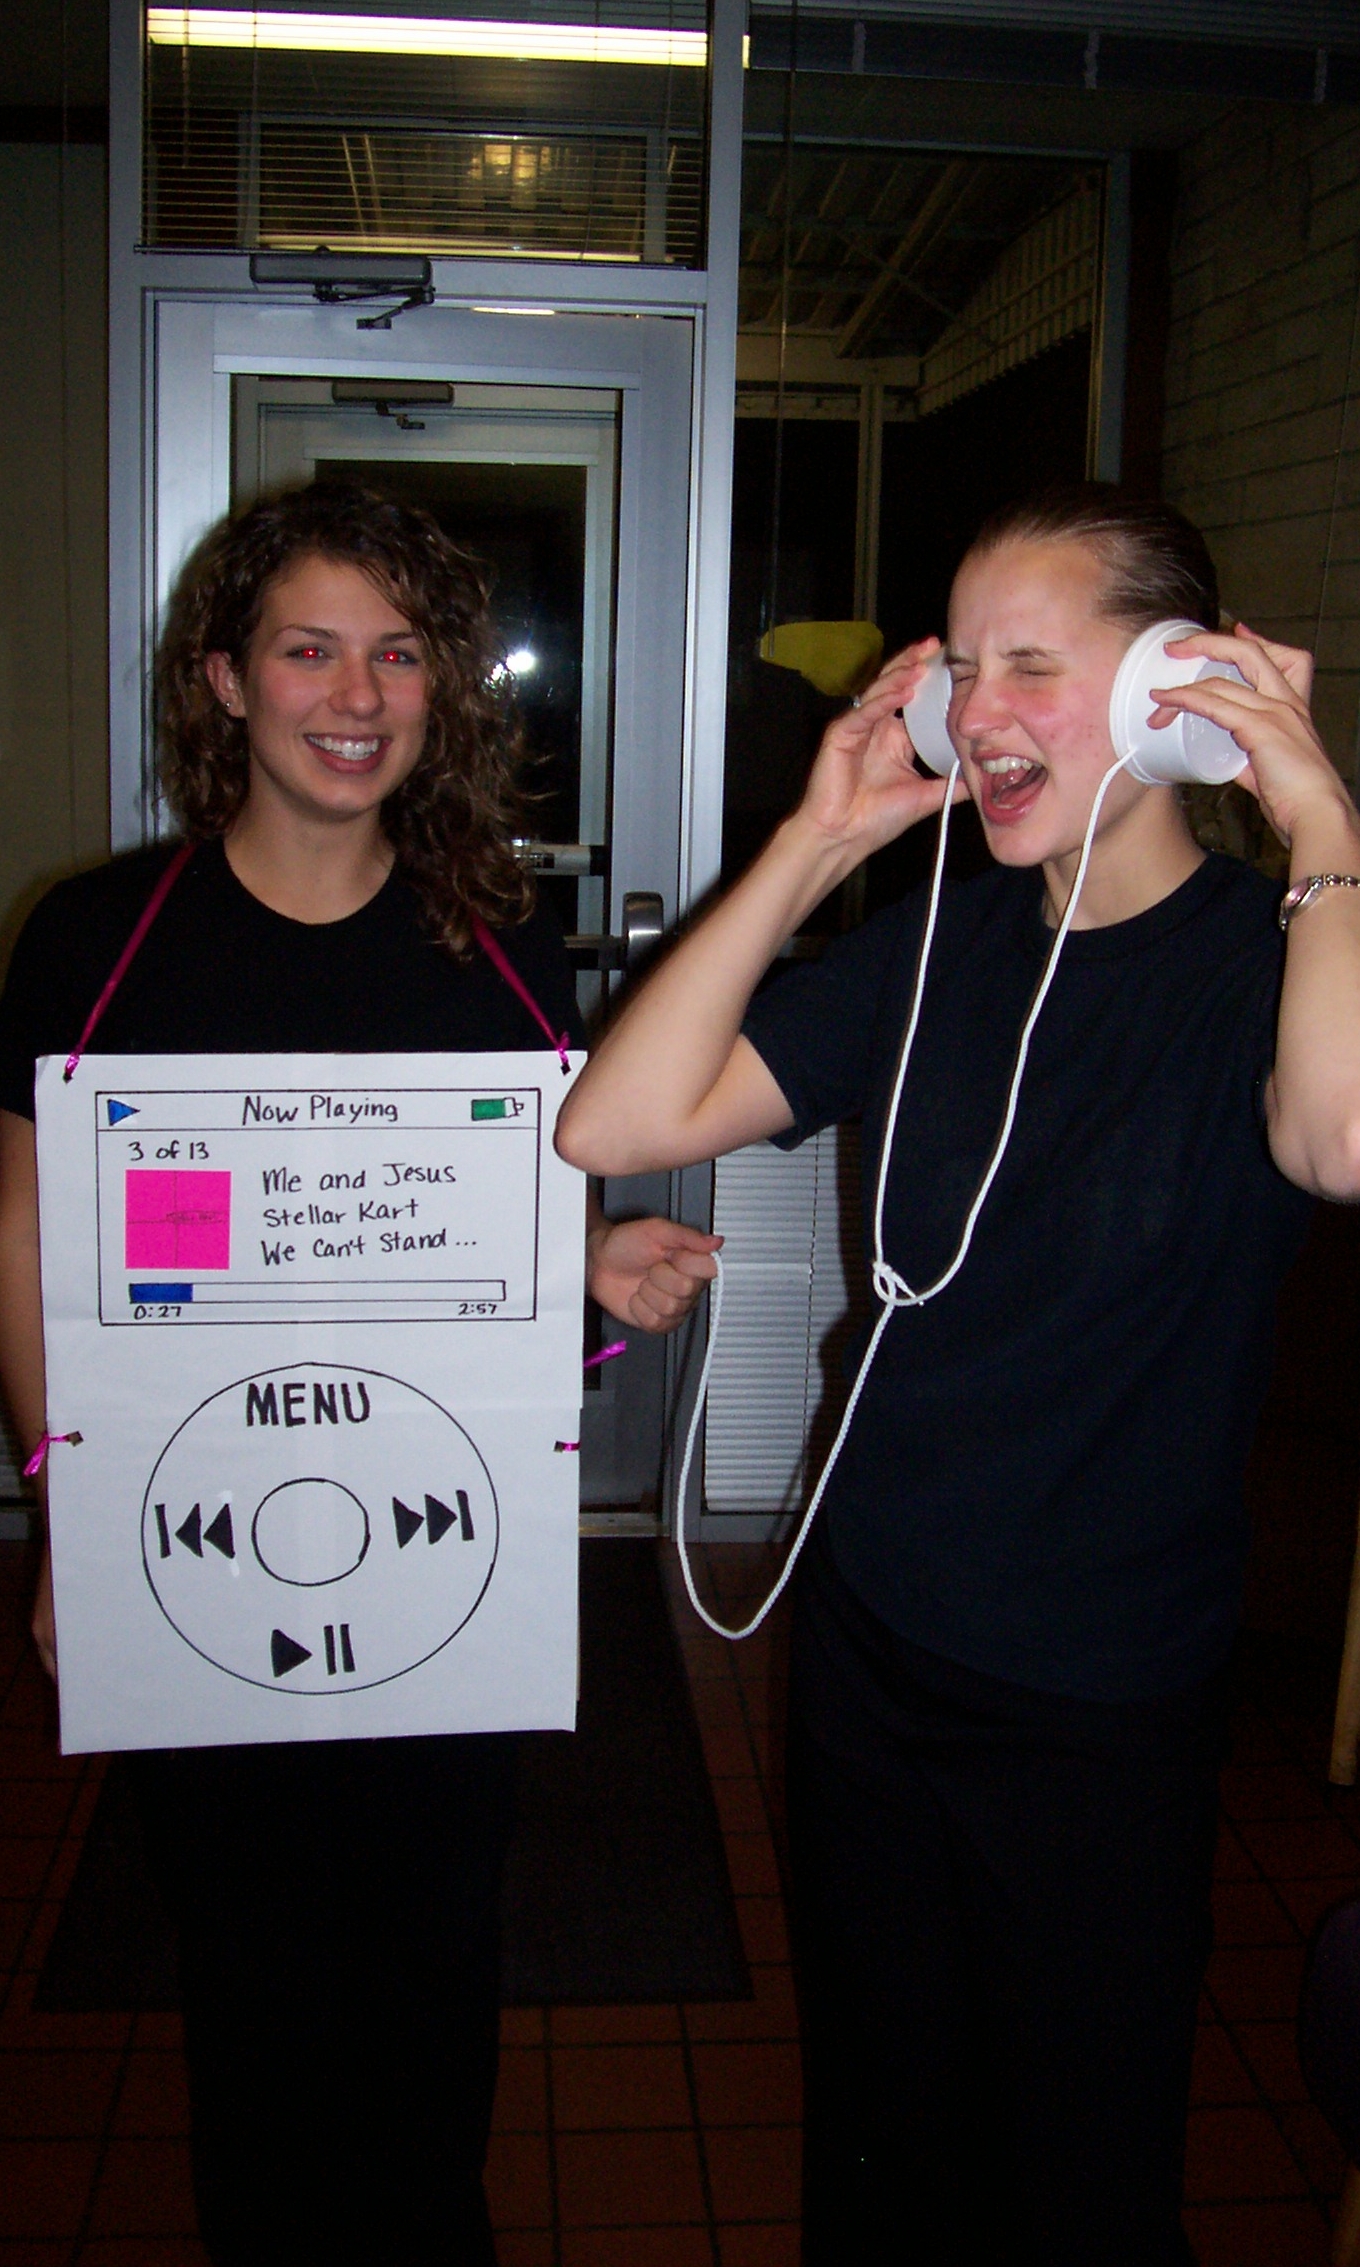 Lauren as an iPod and me tagging along as her listener